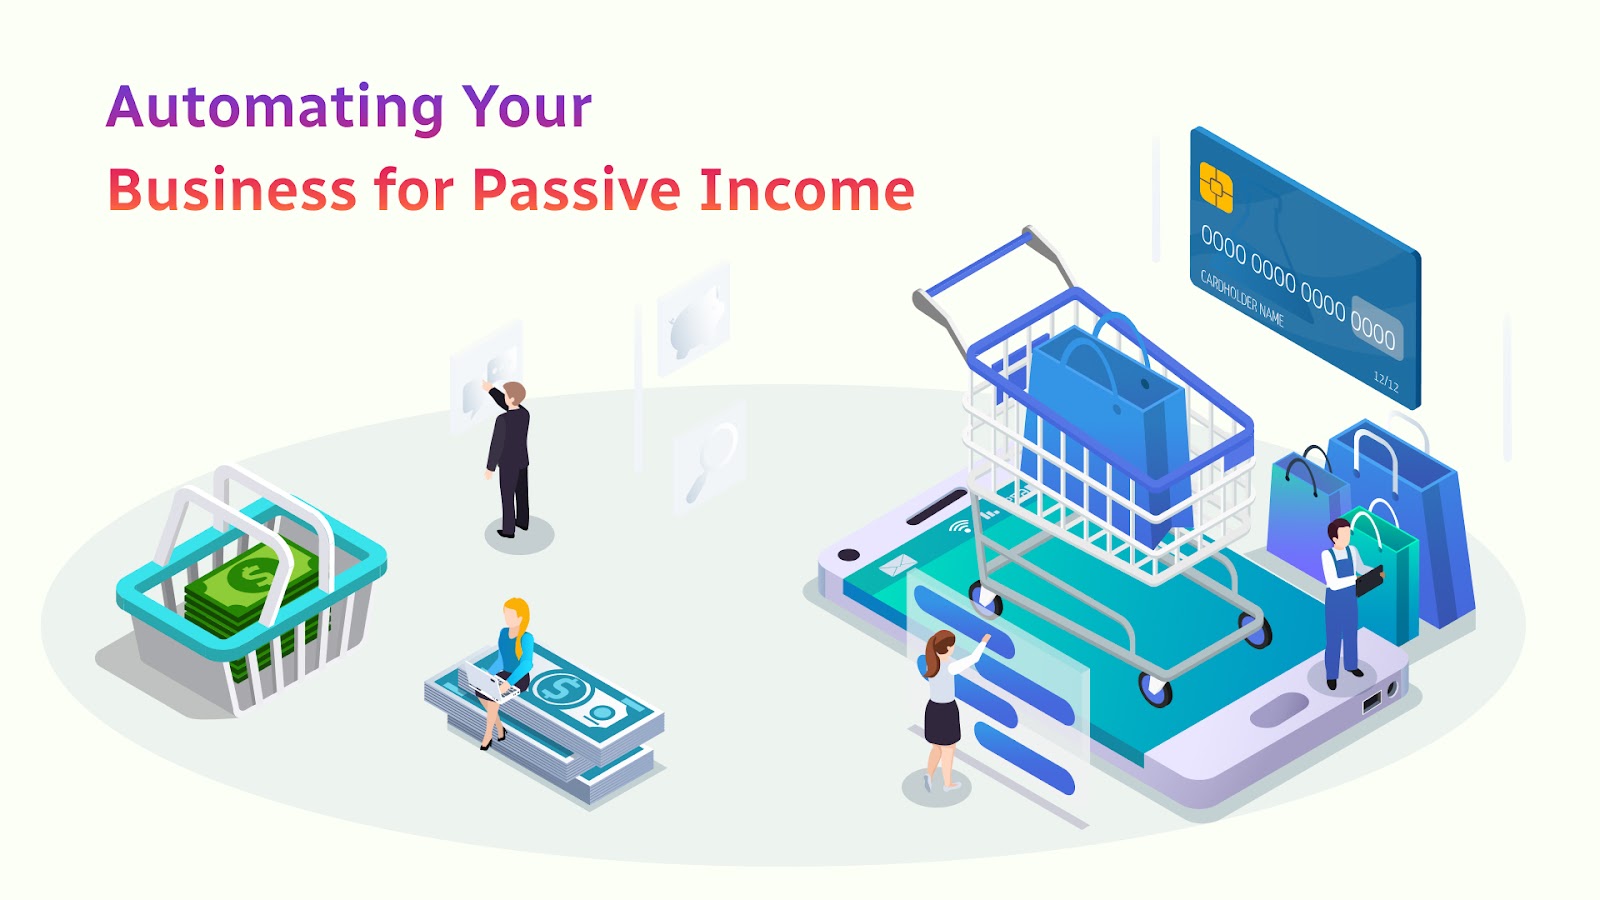 Discuss the importance of automating your e-commerce business for passive income